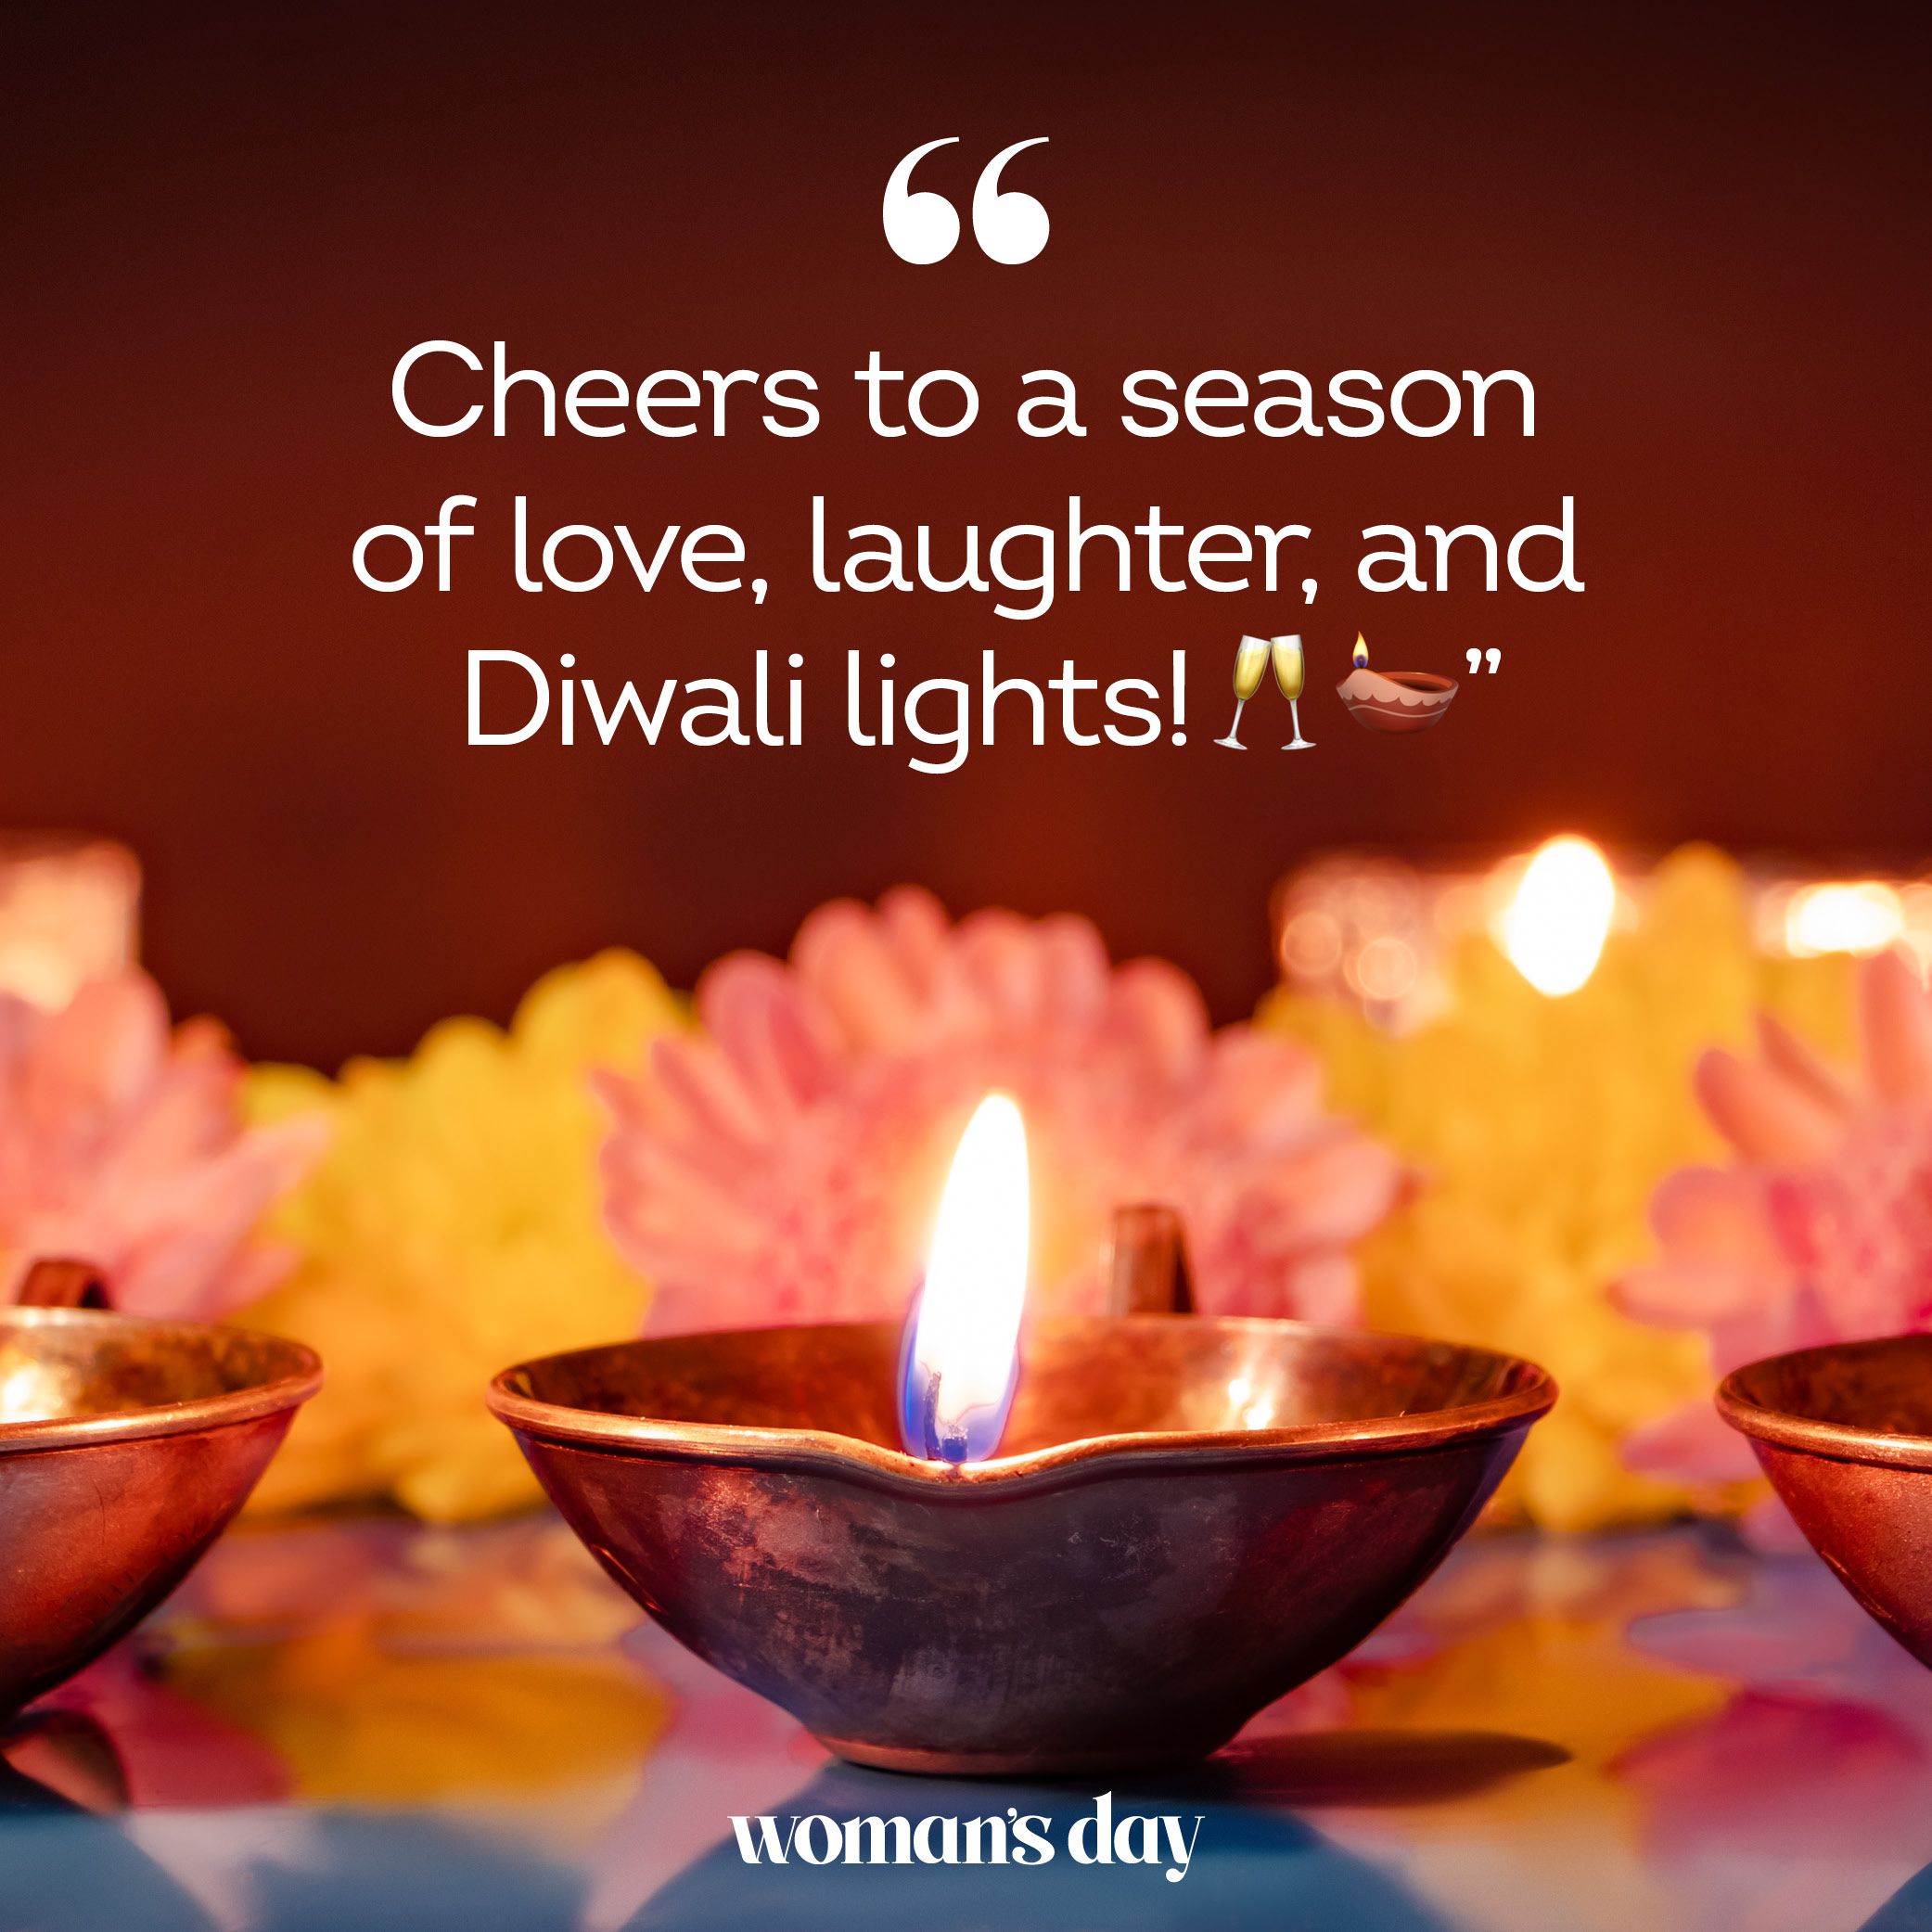 Spreading Light and Joy: Happy Diwali Wishes and Diwali Quotes